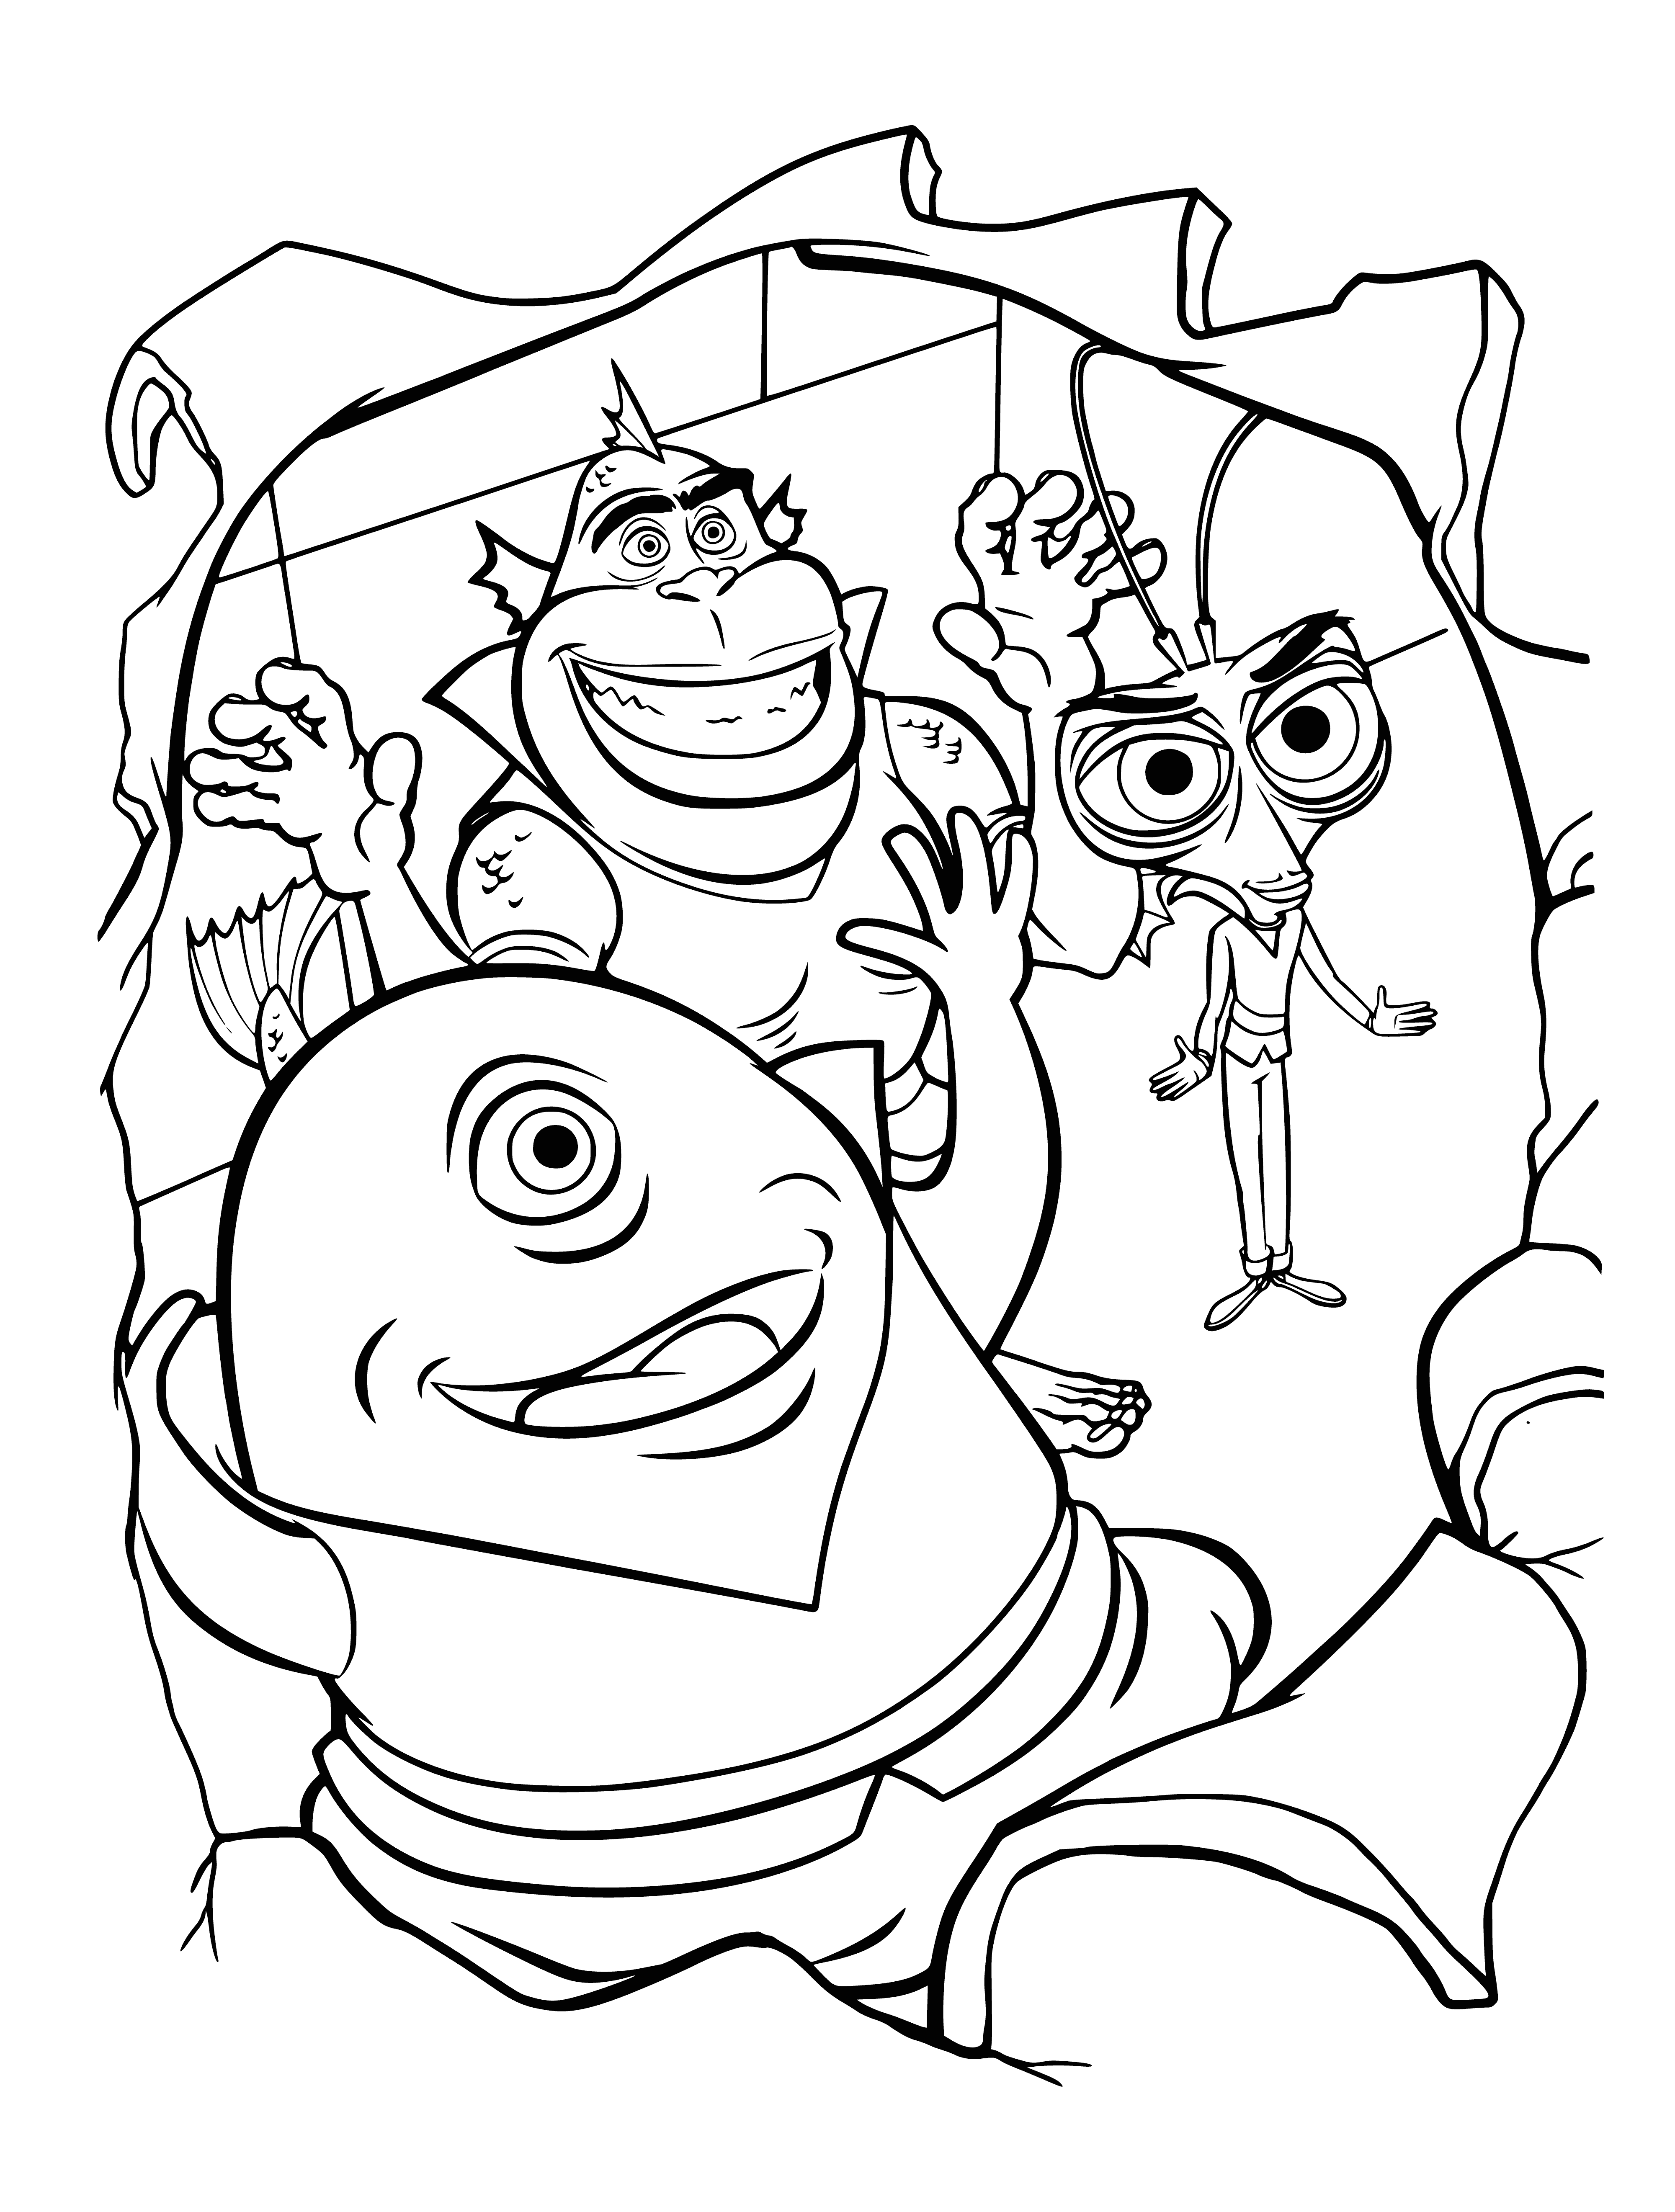 coloring page: Creature looms over smaller beings, eyes burning with anger, sharp teeth in open mouth. Smaller beings cower in fear.